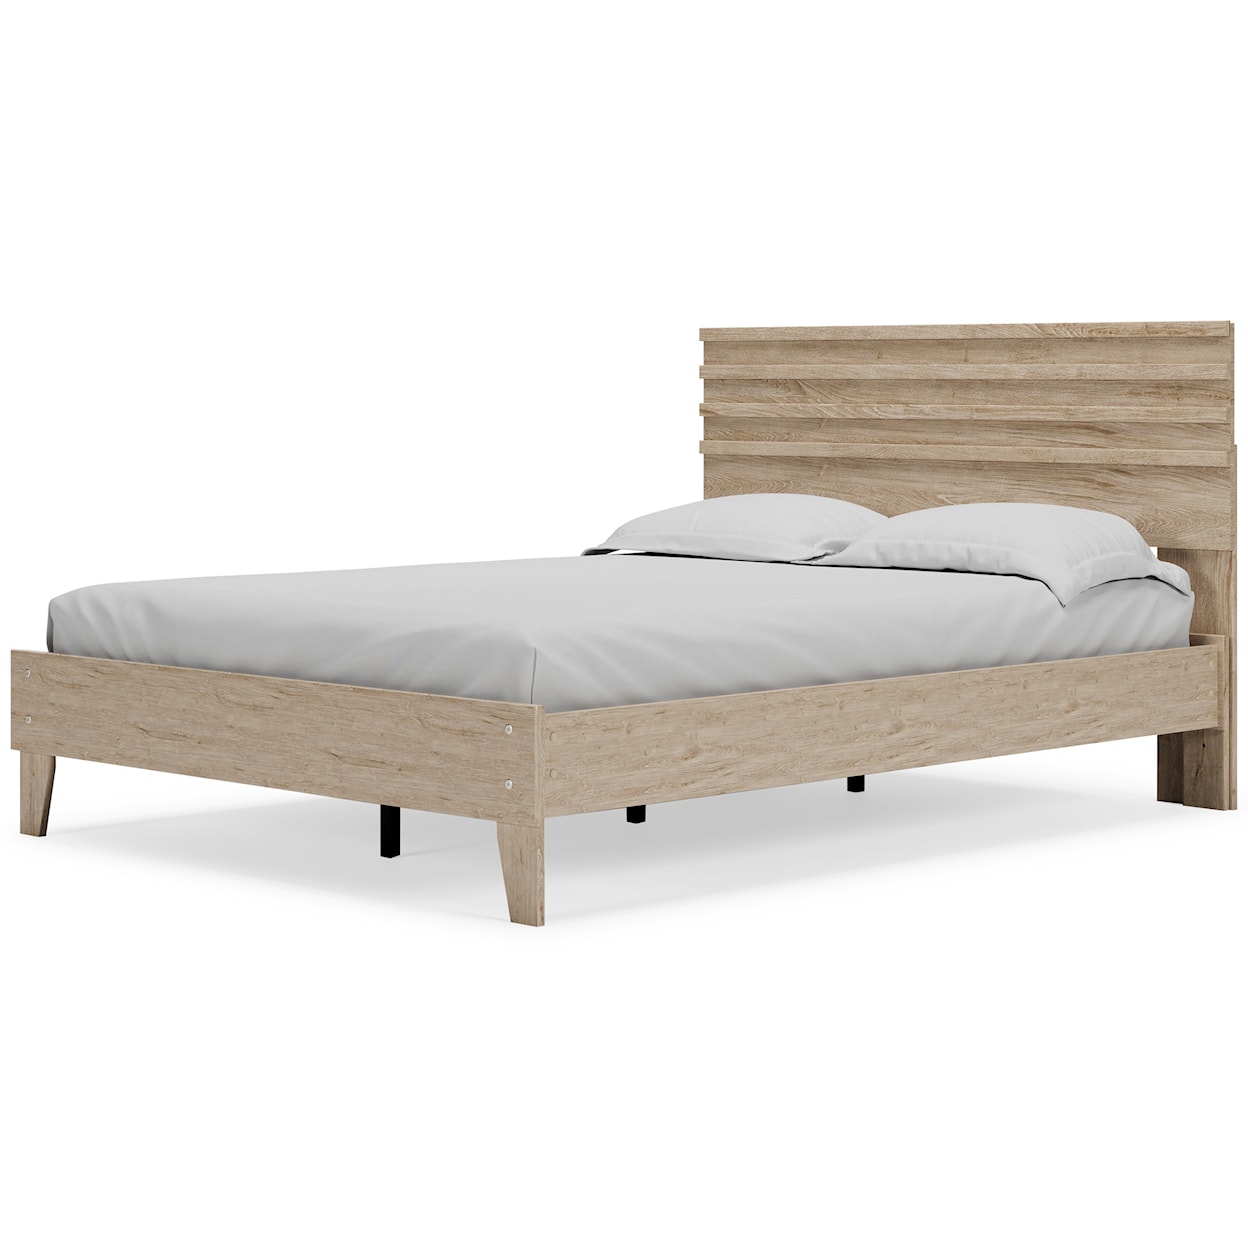 Signature Design by Ashley Oliah Queen Panel Platform Bed